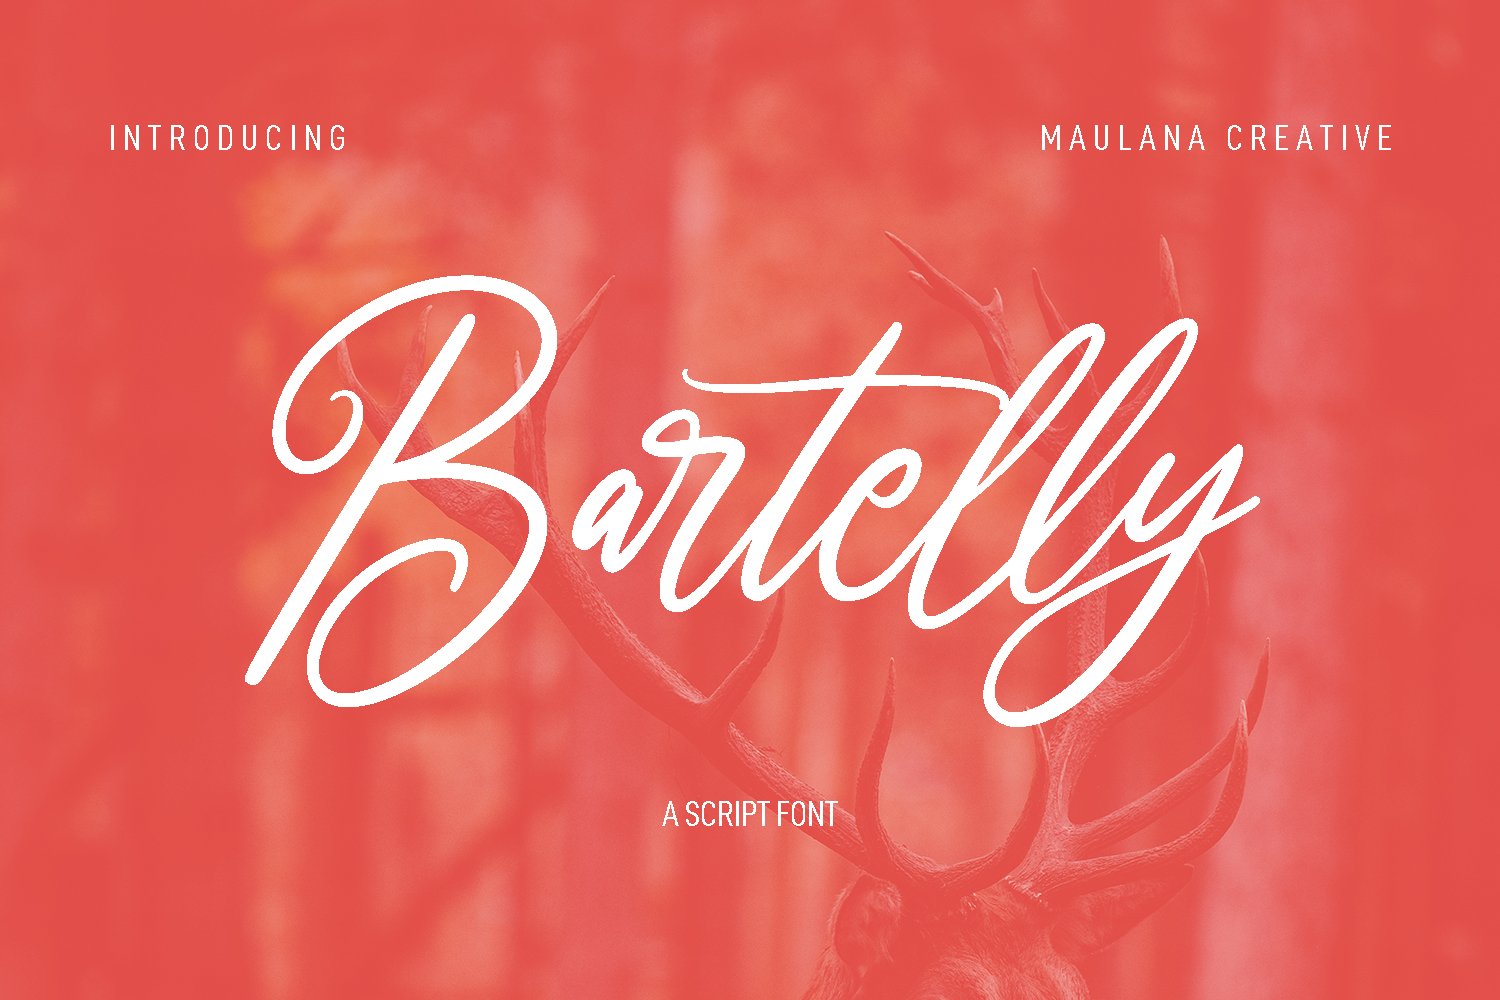 Bartelly Script Font cover image.